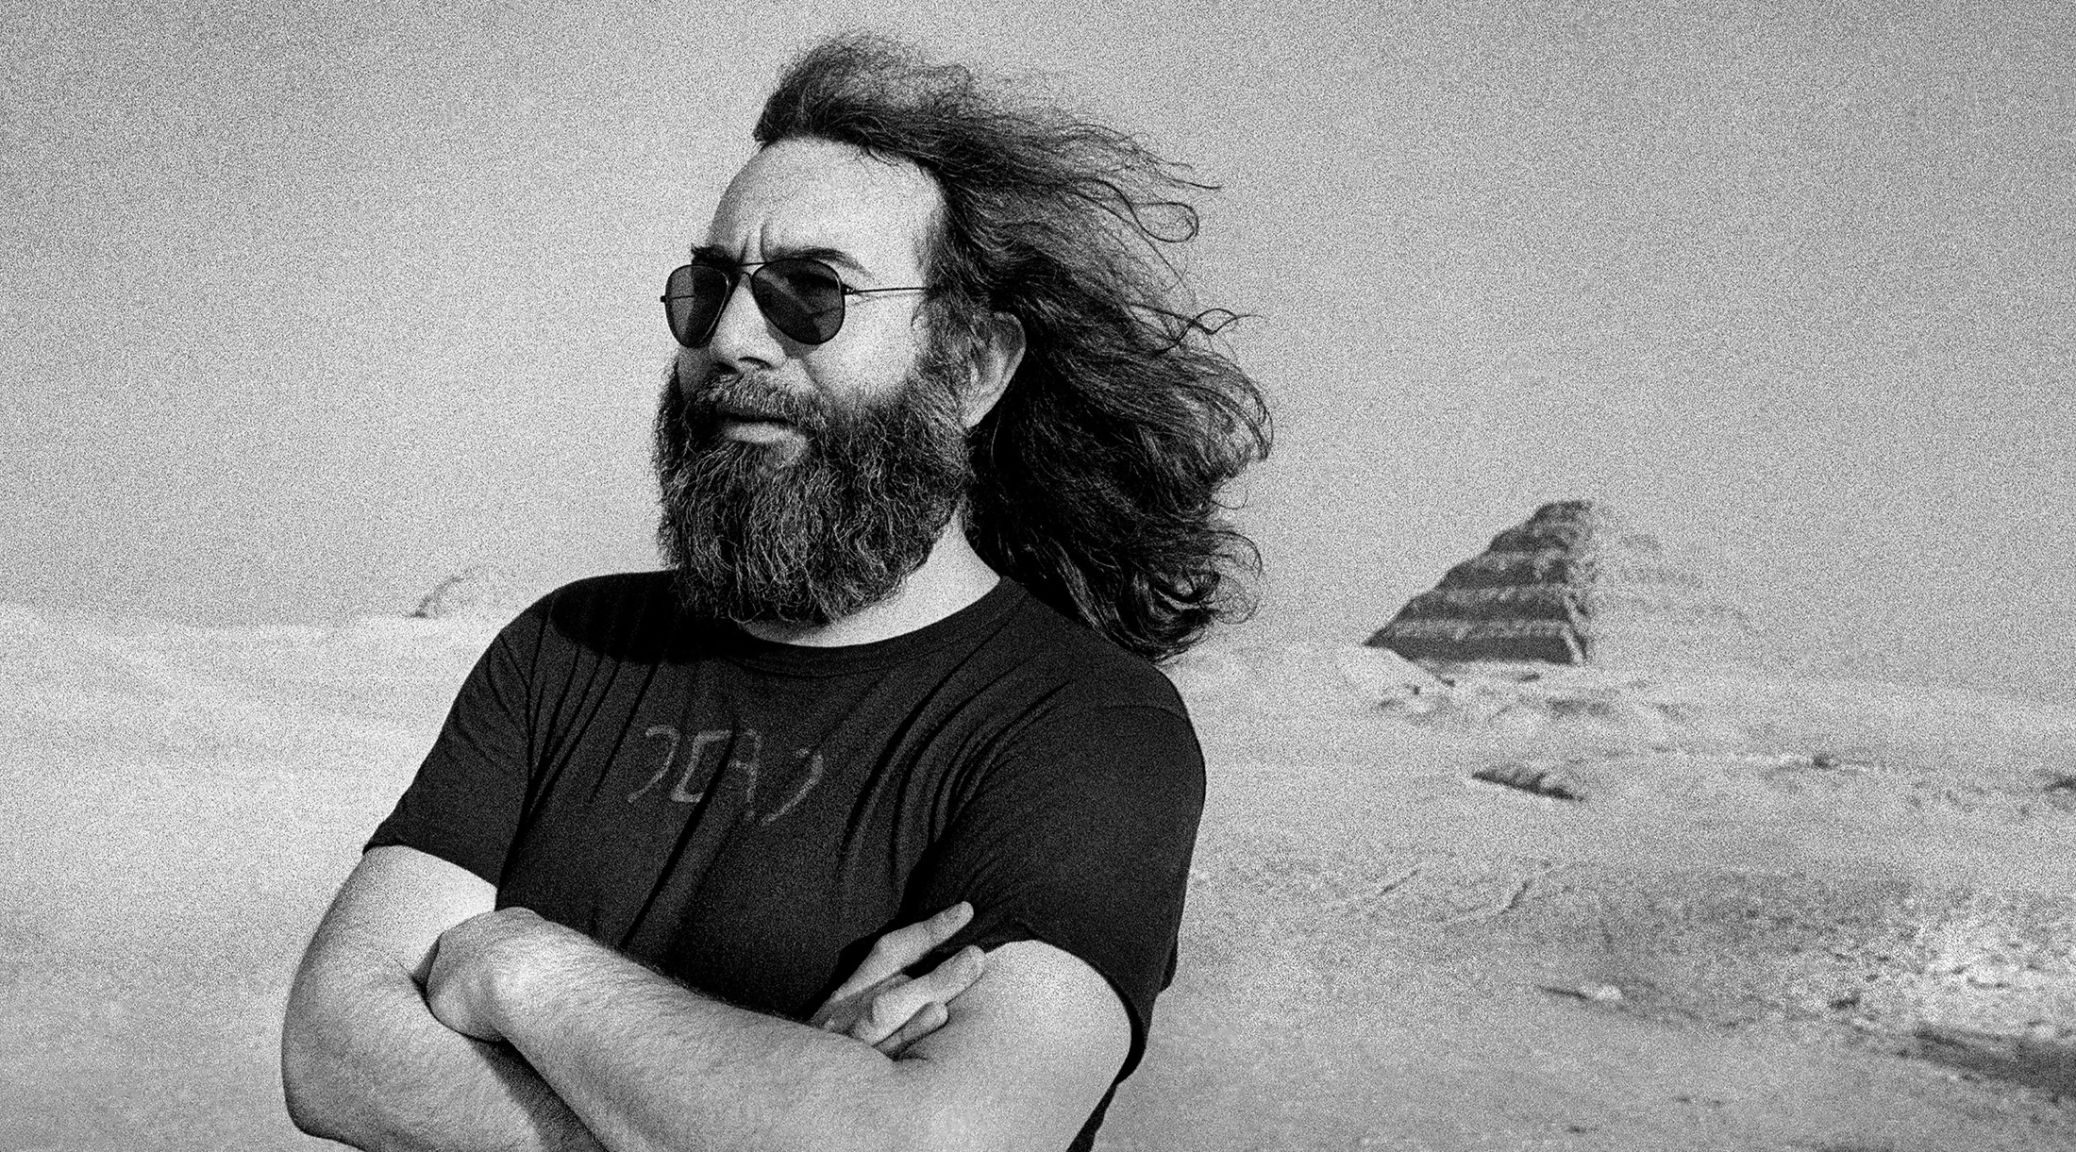 image of jerry garcia